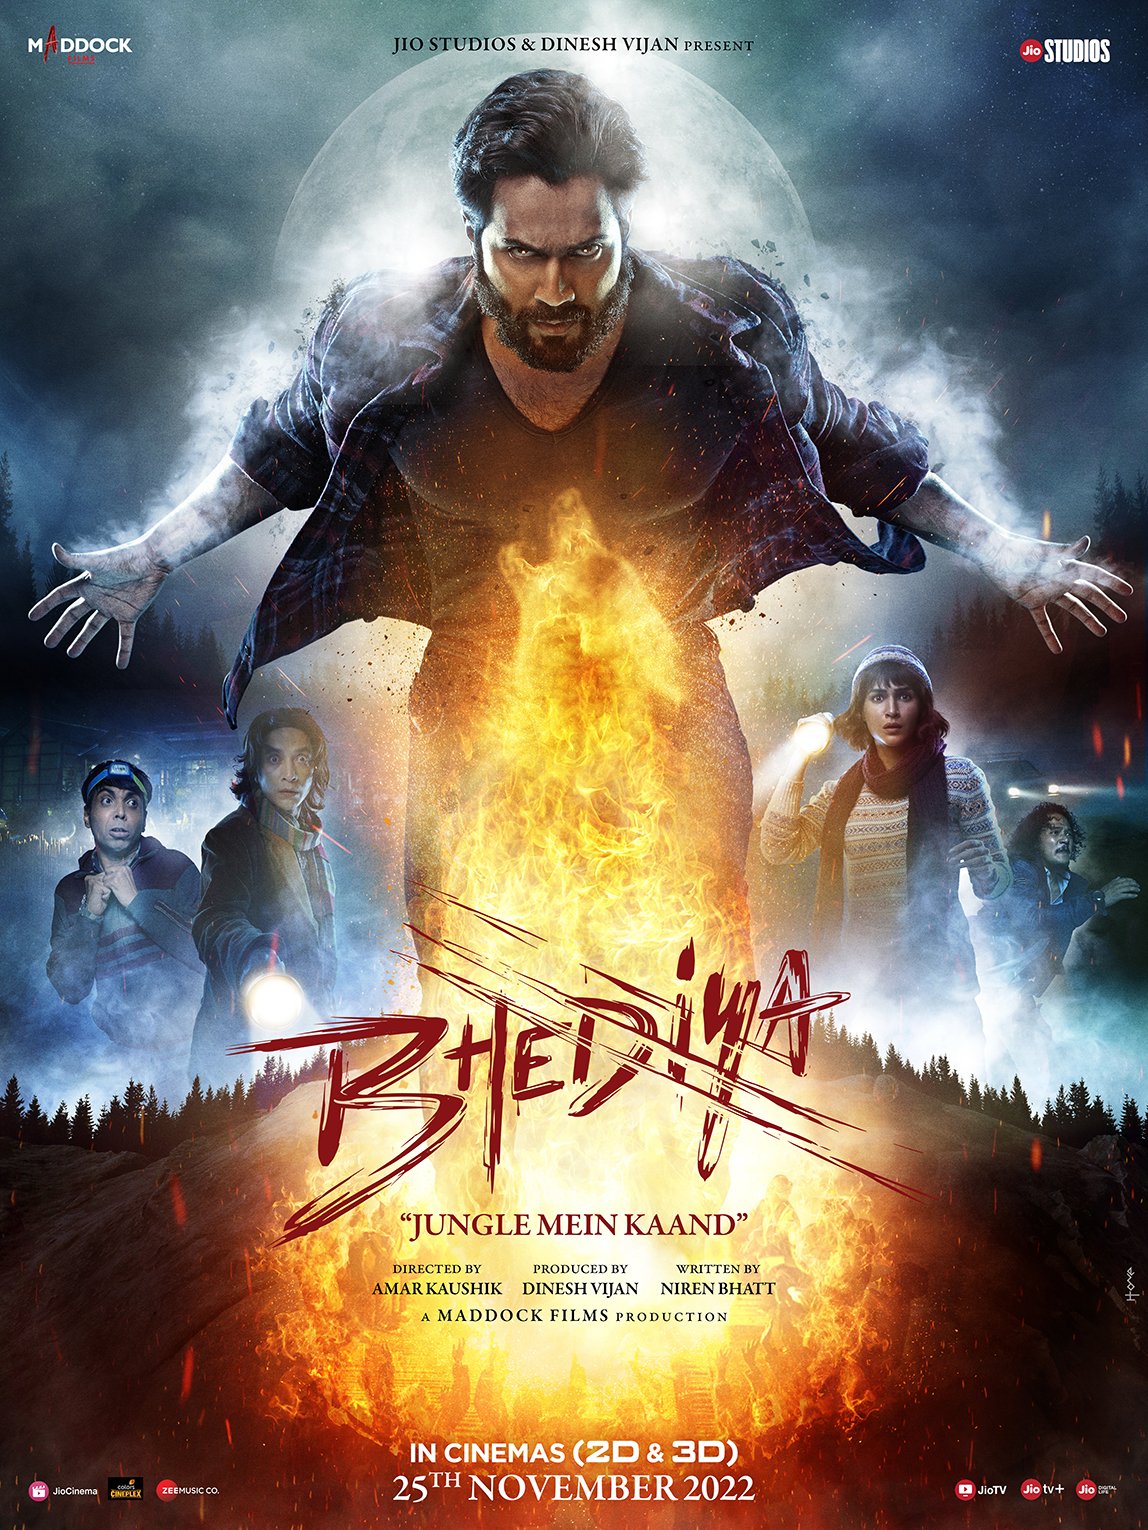 Bhediya trailer promises great comedy with spine chilling horror